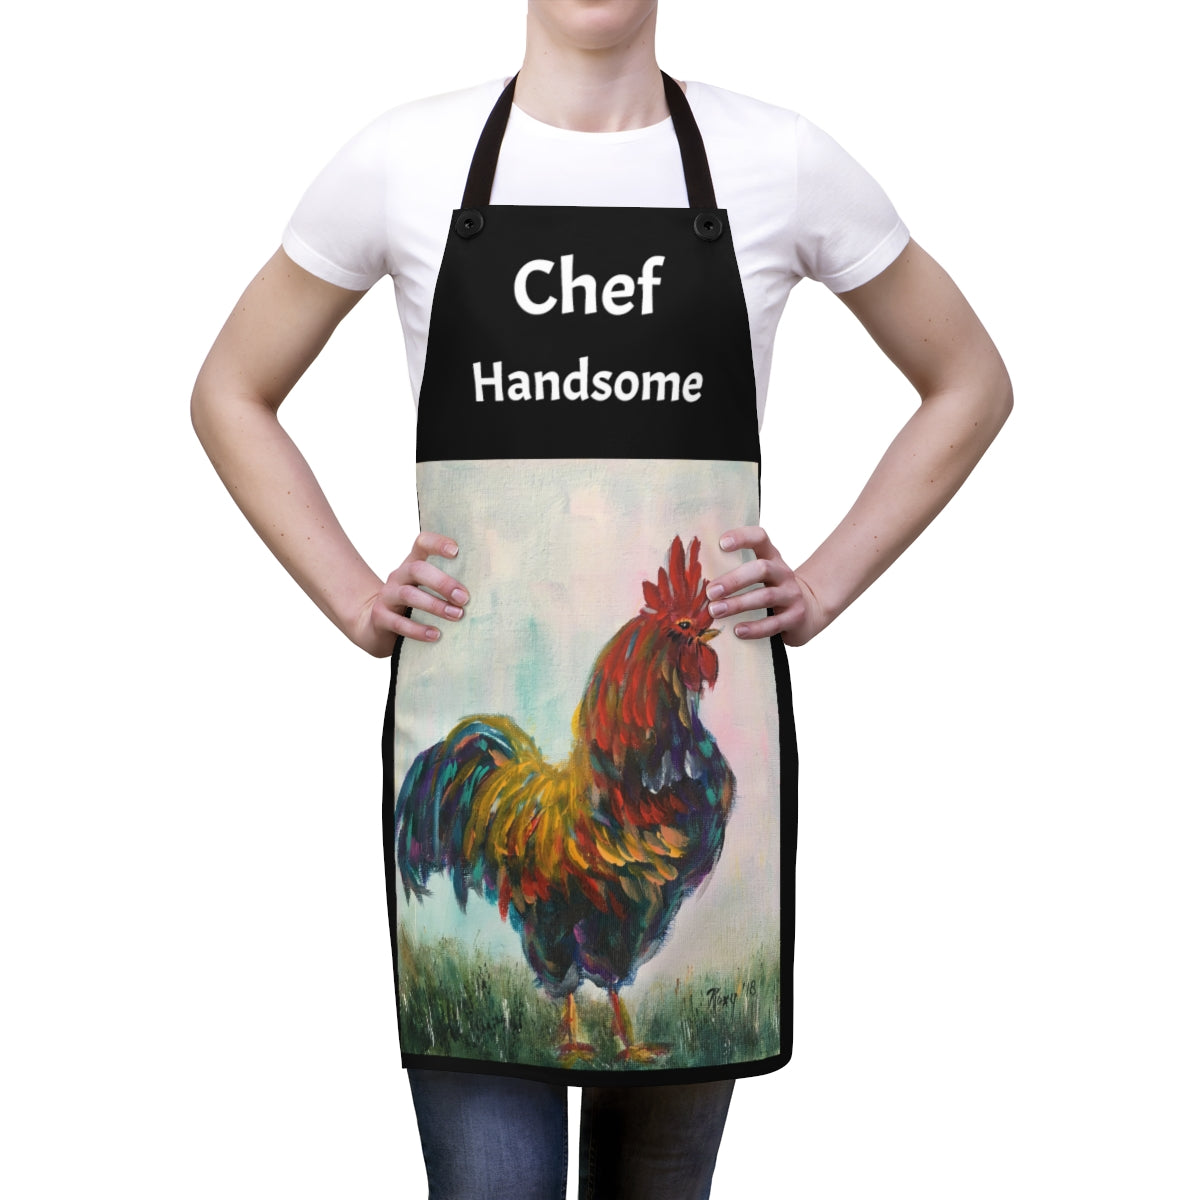 Chef Handsome   Black Kitchen Apron  Rooster Painting